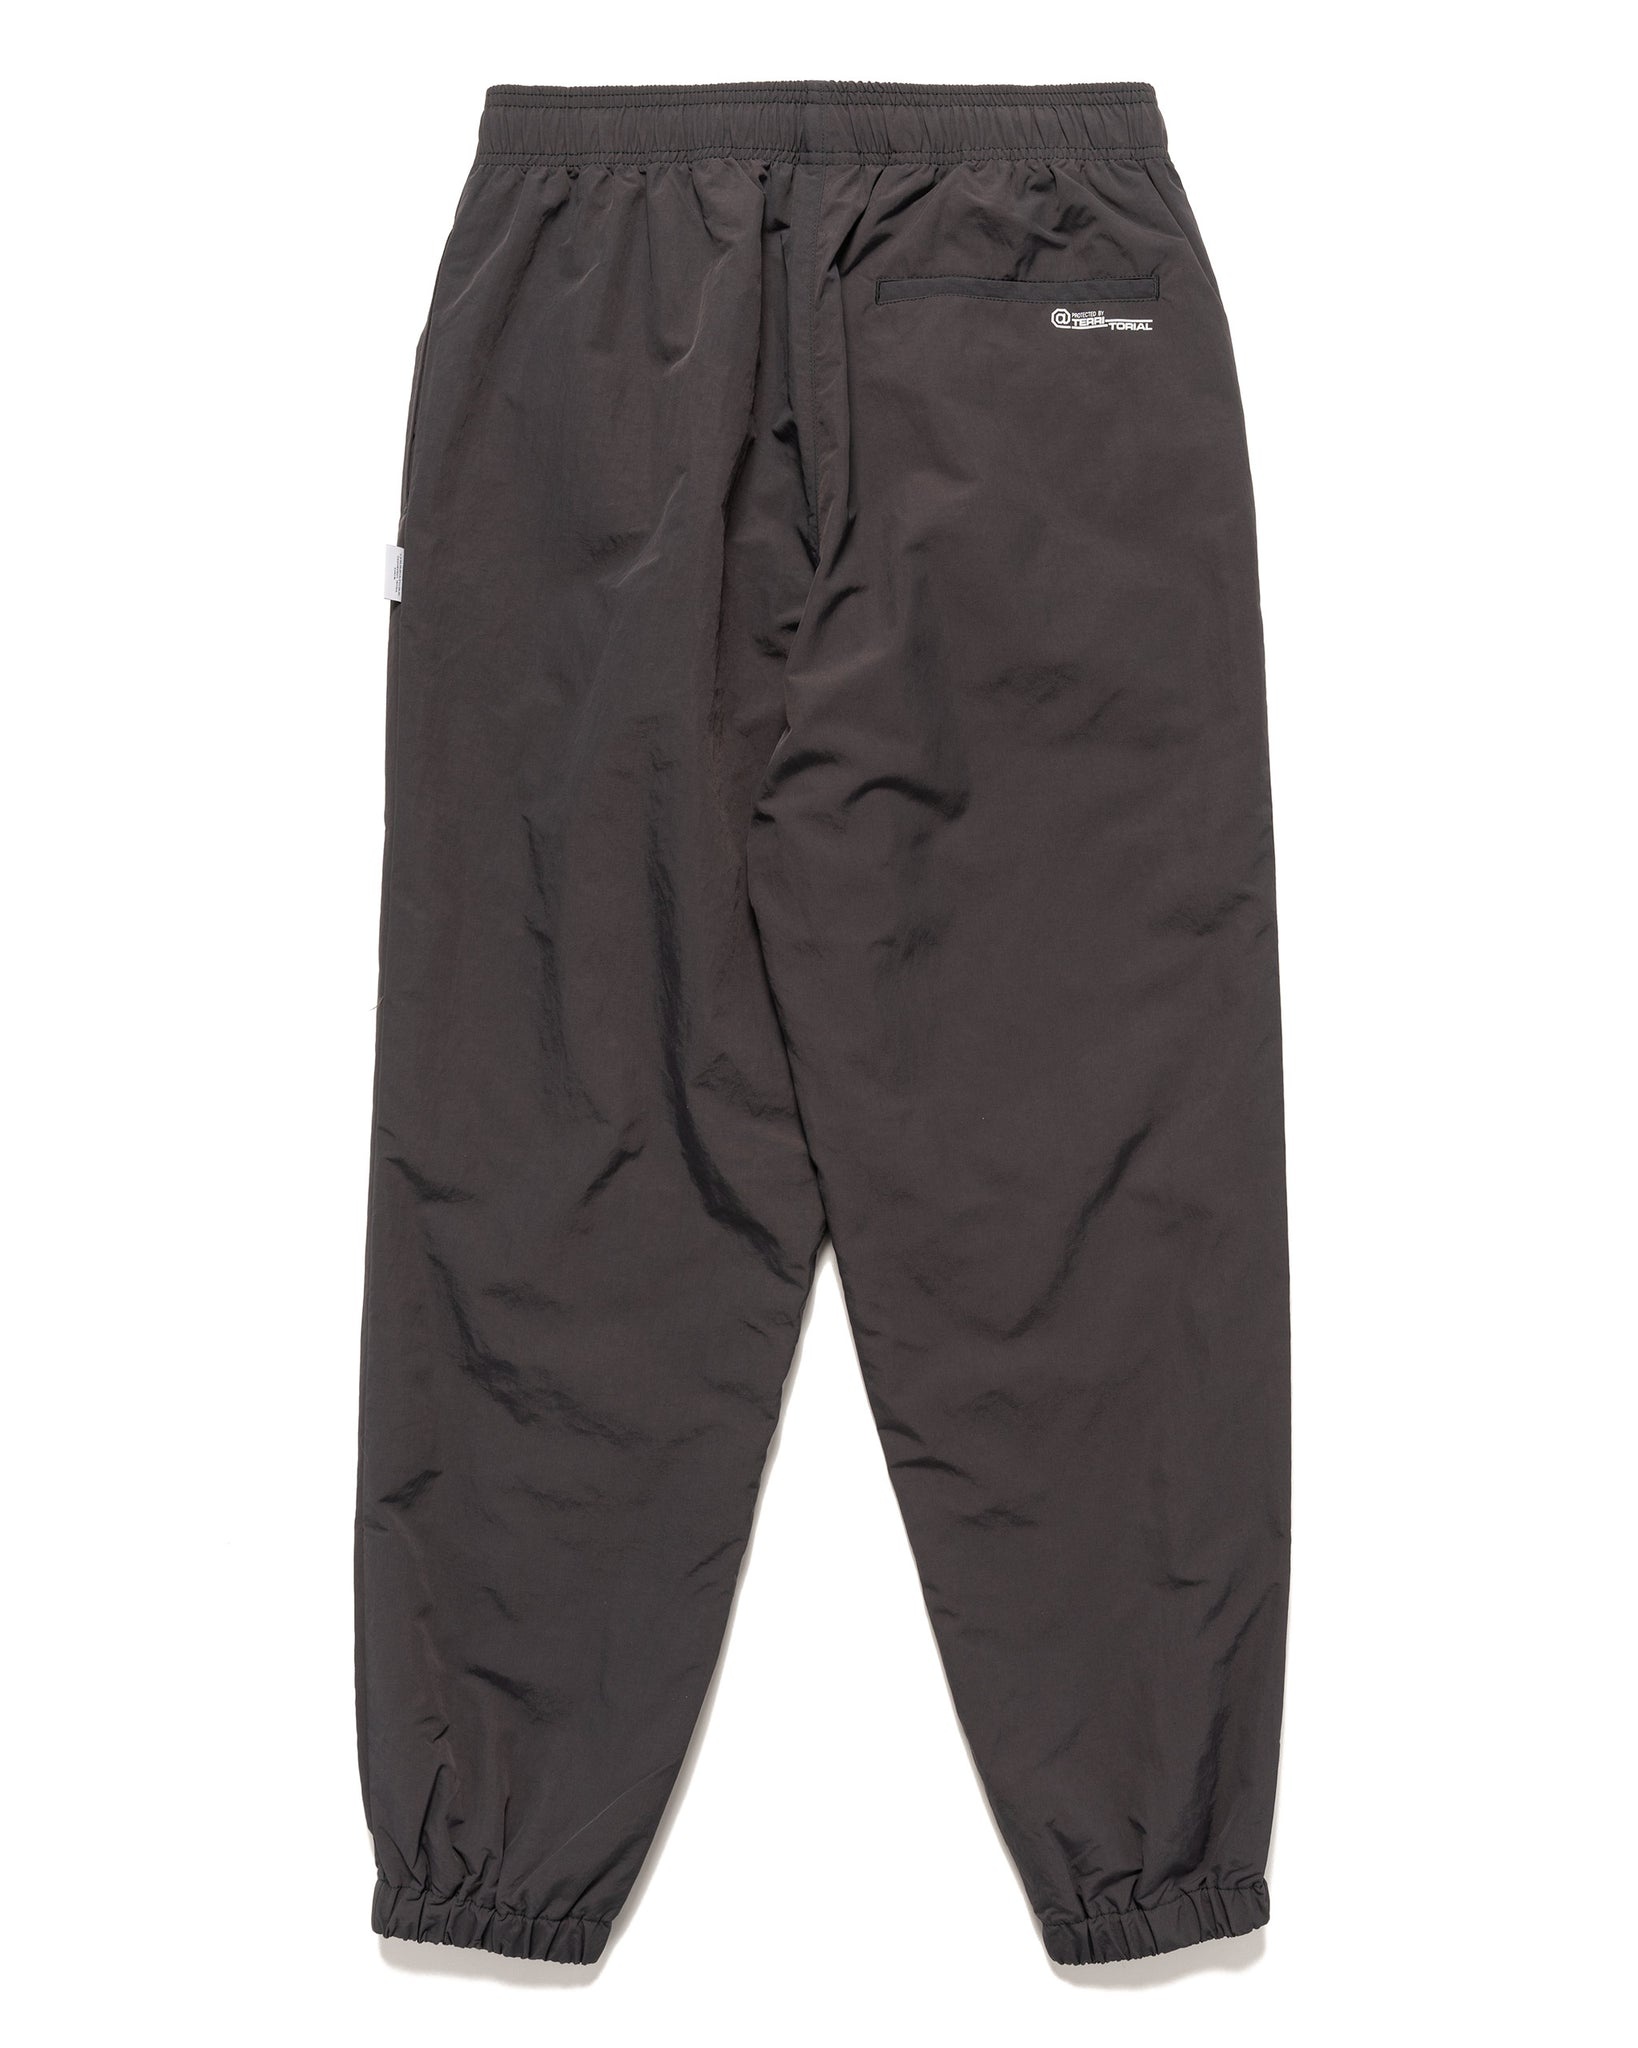 WTAPS SPST2001 / Trousers / Nylon. Weather Charcoal | REVERSIBLE